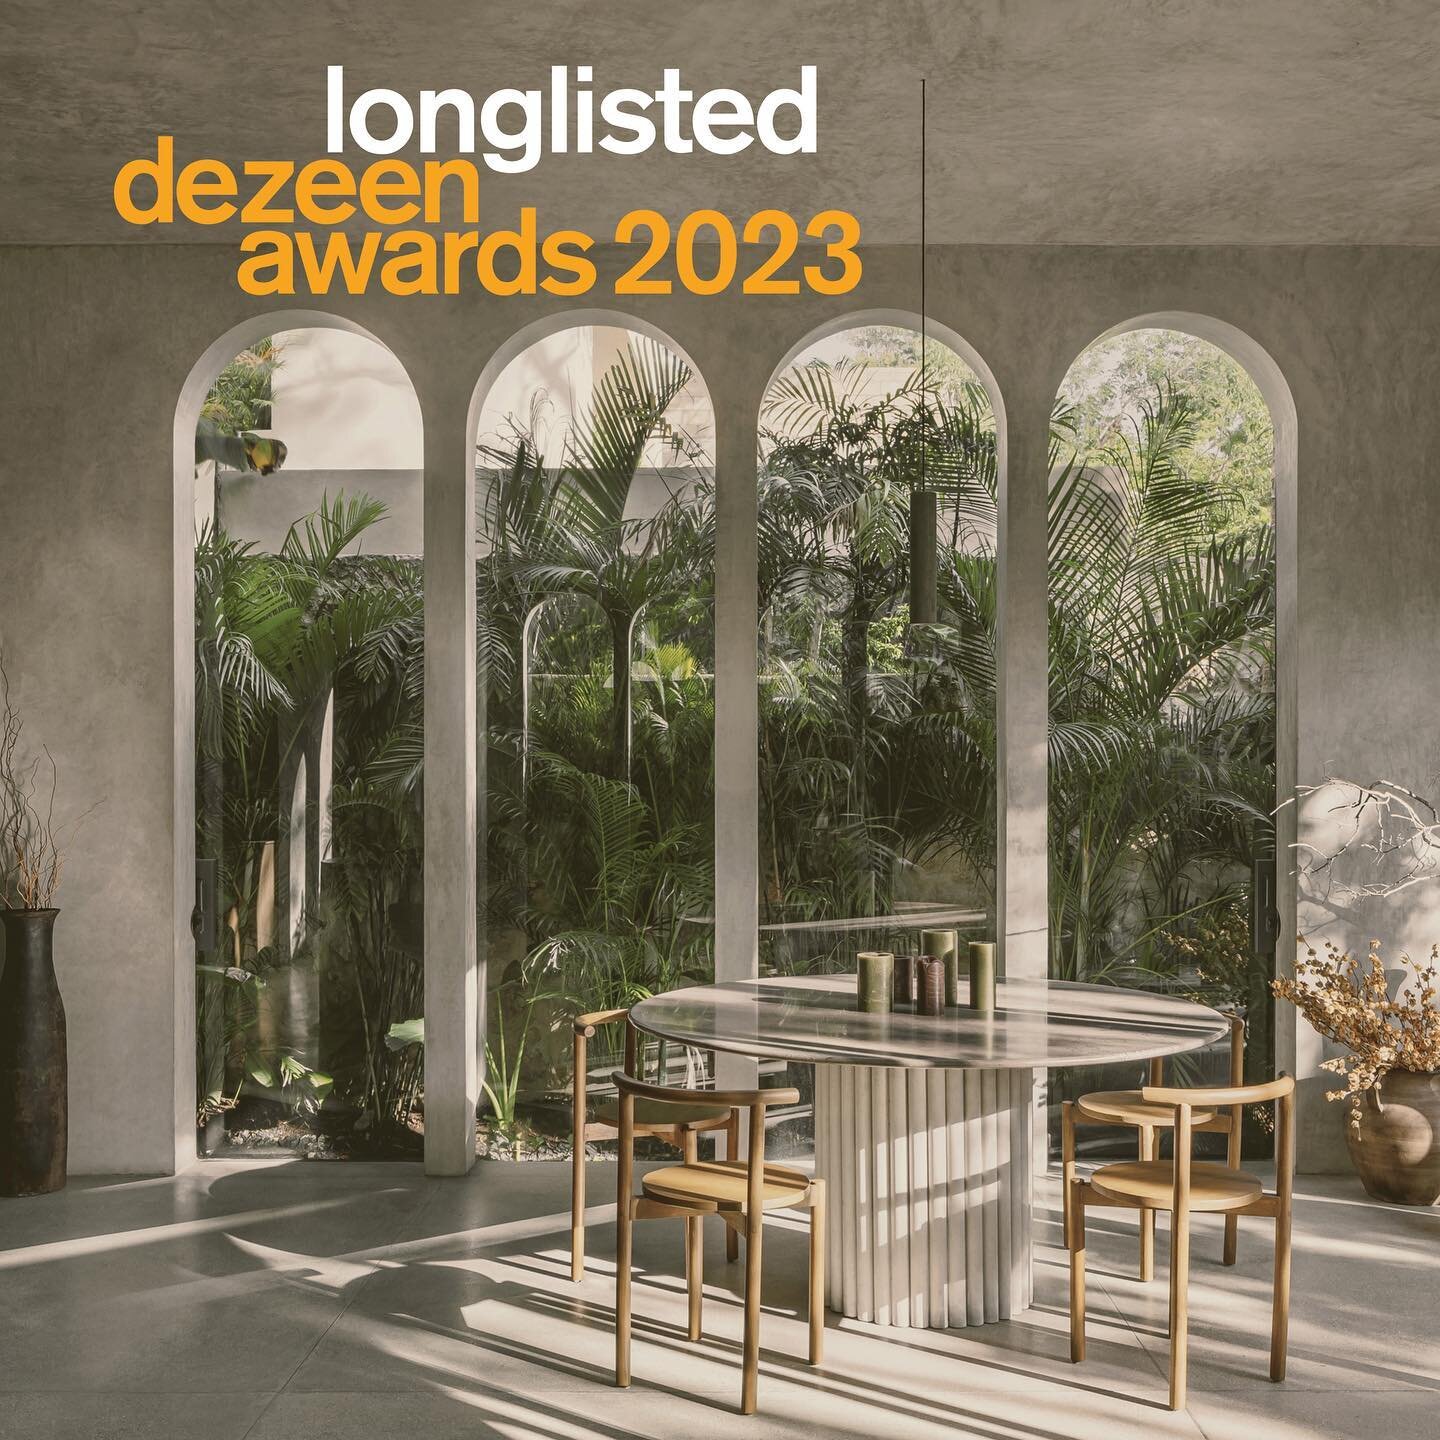 Proud to announce that Villa Petricor has been longlisted for #dezeenawards in the Rural House category. Thank you @dezeen and @dezeenawards_ !

Photo by @cesarbejarstudio
Project: @villapetricor 

#architecture #design #interiordesign #tulum #tuluma